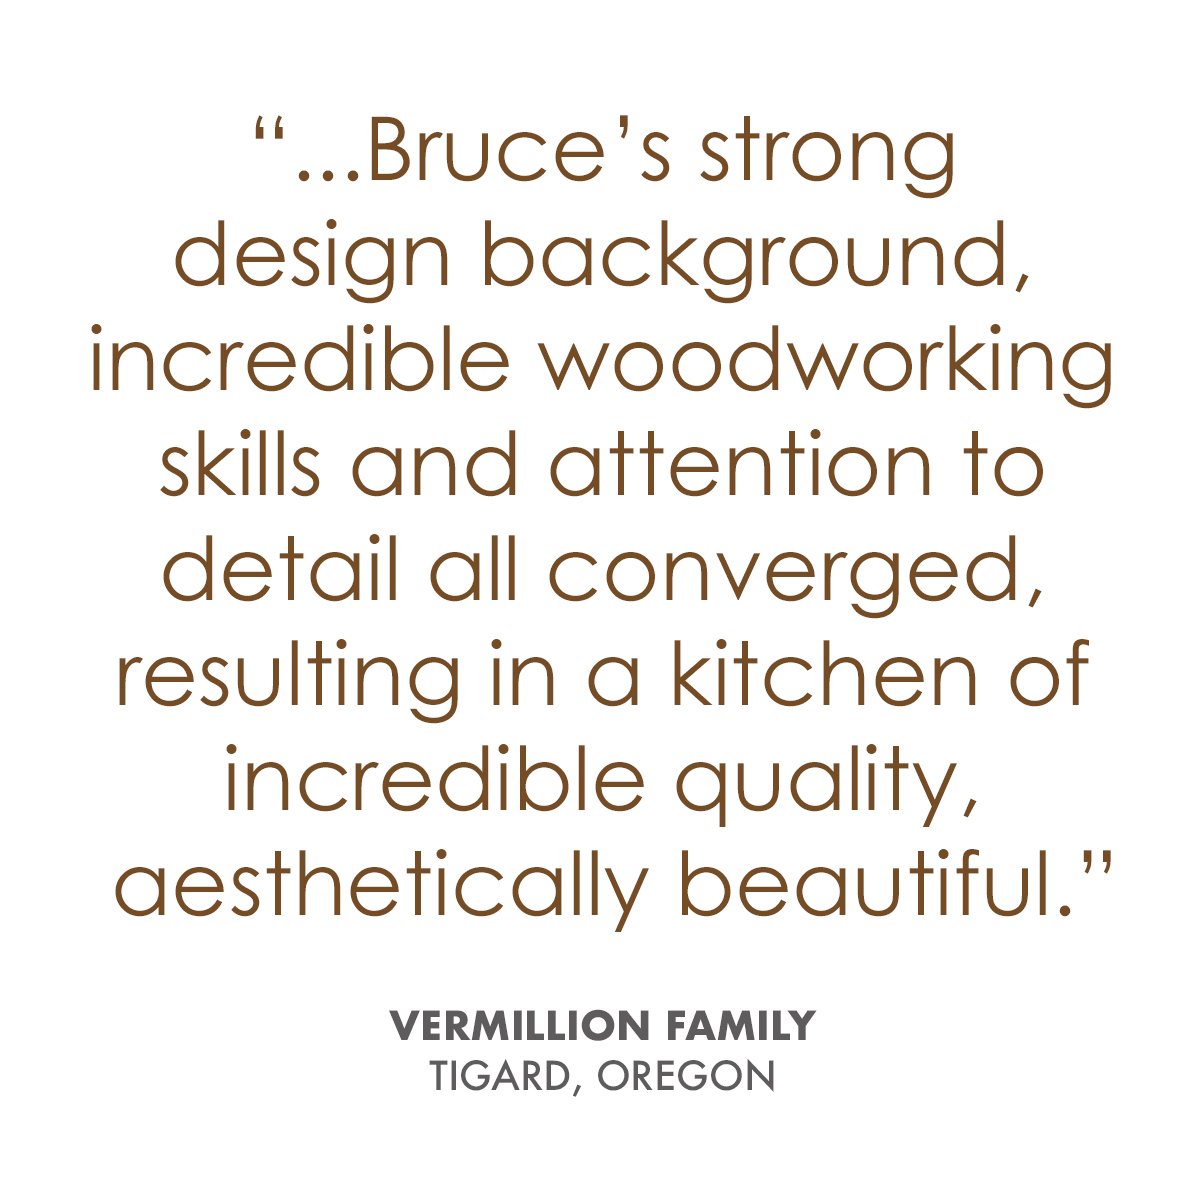   “Our 1911 Portland craftsman home needed a special skill set for a new kitchen to fit our home and our budget. Bruce’s strong design background, incredible woodworking skills and attention to detail all converged, resulting in a kitchen of incredib